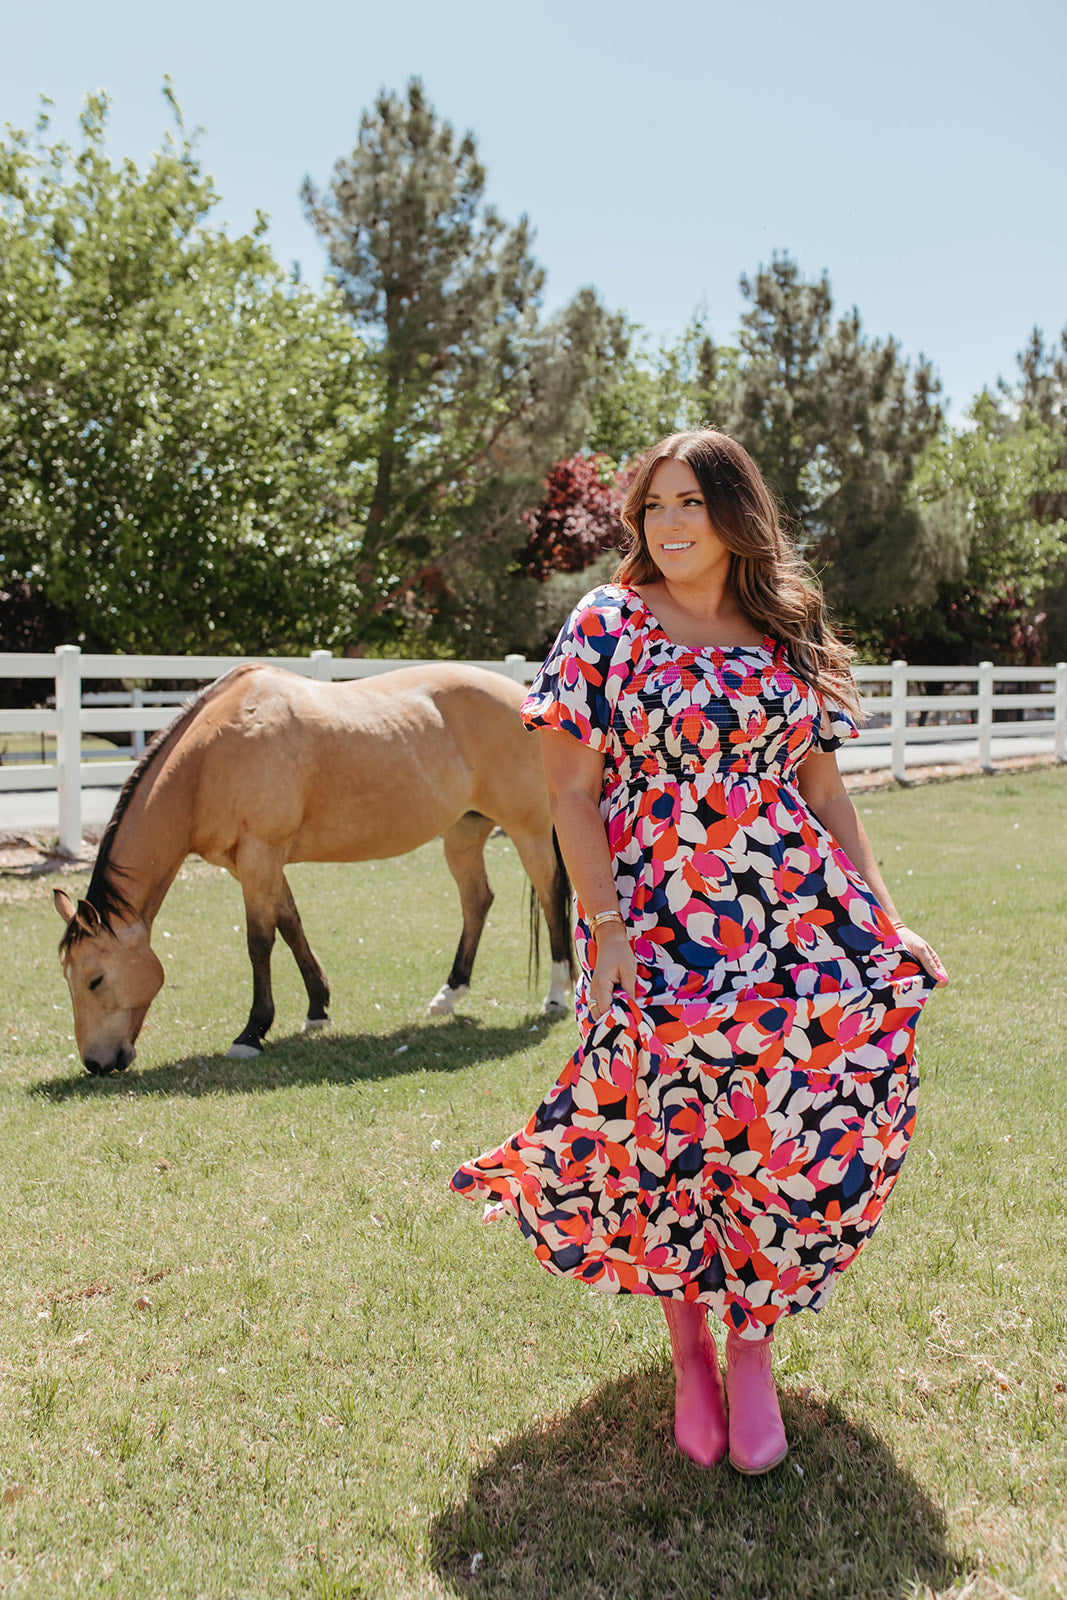 THE MAGNOLIA FLORAL DRESS BY PINK DESERT